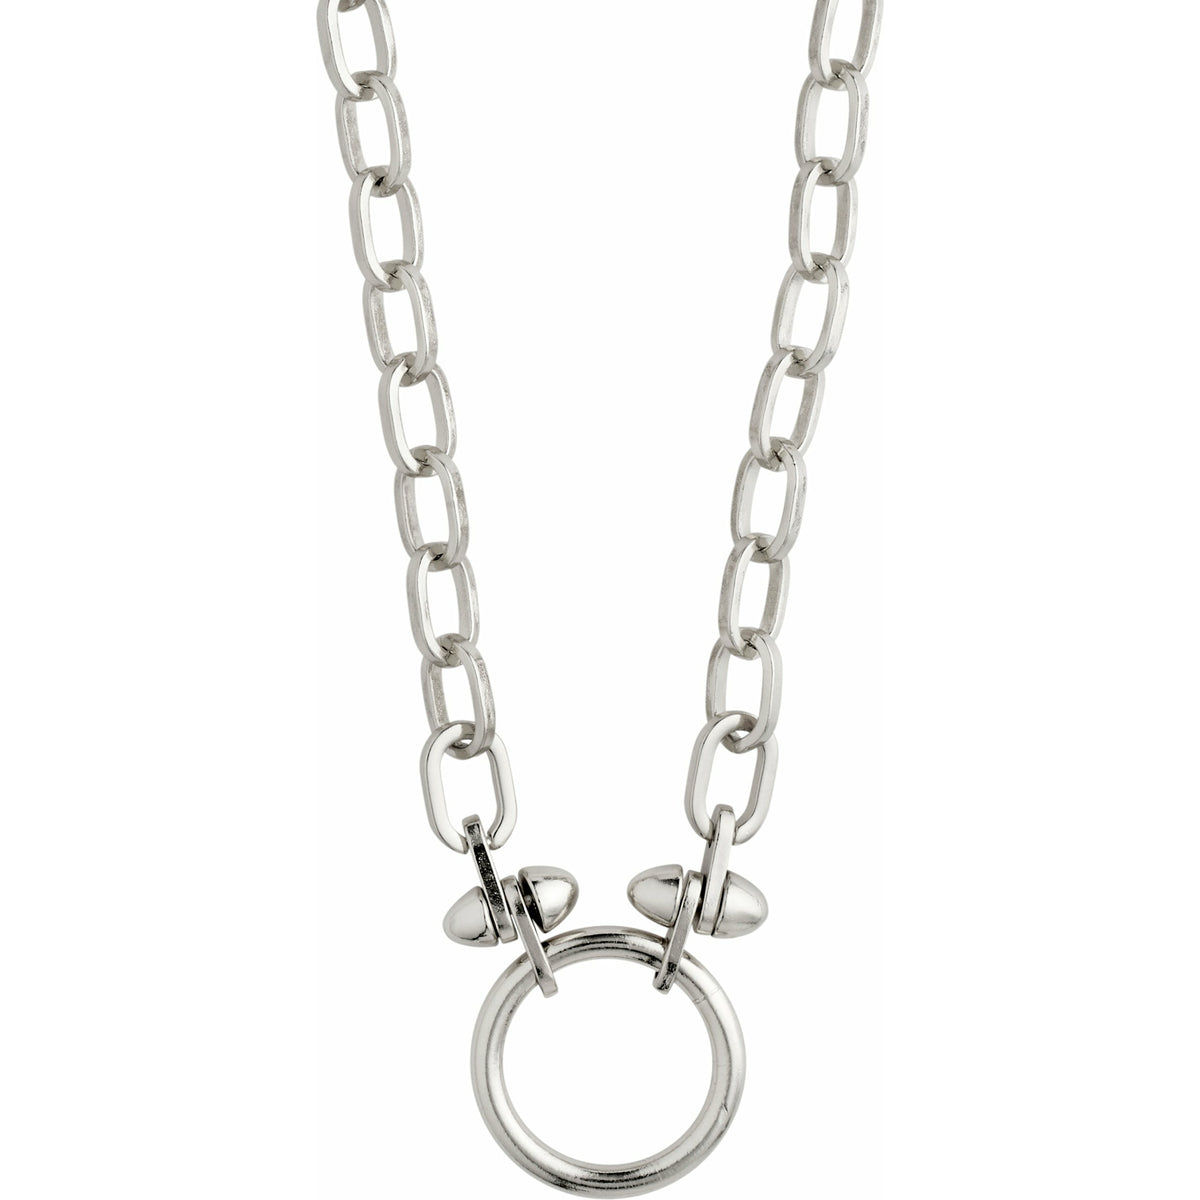 A thick, chunky chain with large cable links, meet at the centre to hold a bold ring to symbolize unity. The two rounded rivets provide additional impact. Polished finish.    Handmade with heart.  Danish design.   silver plated.  More information: - Chain measures 40 cm chain + 9 cm extension chain